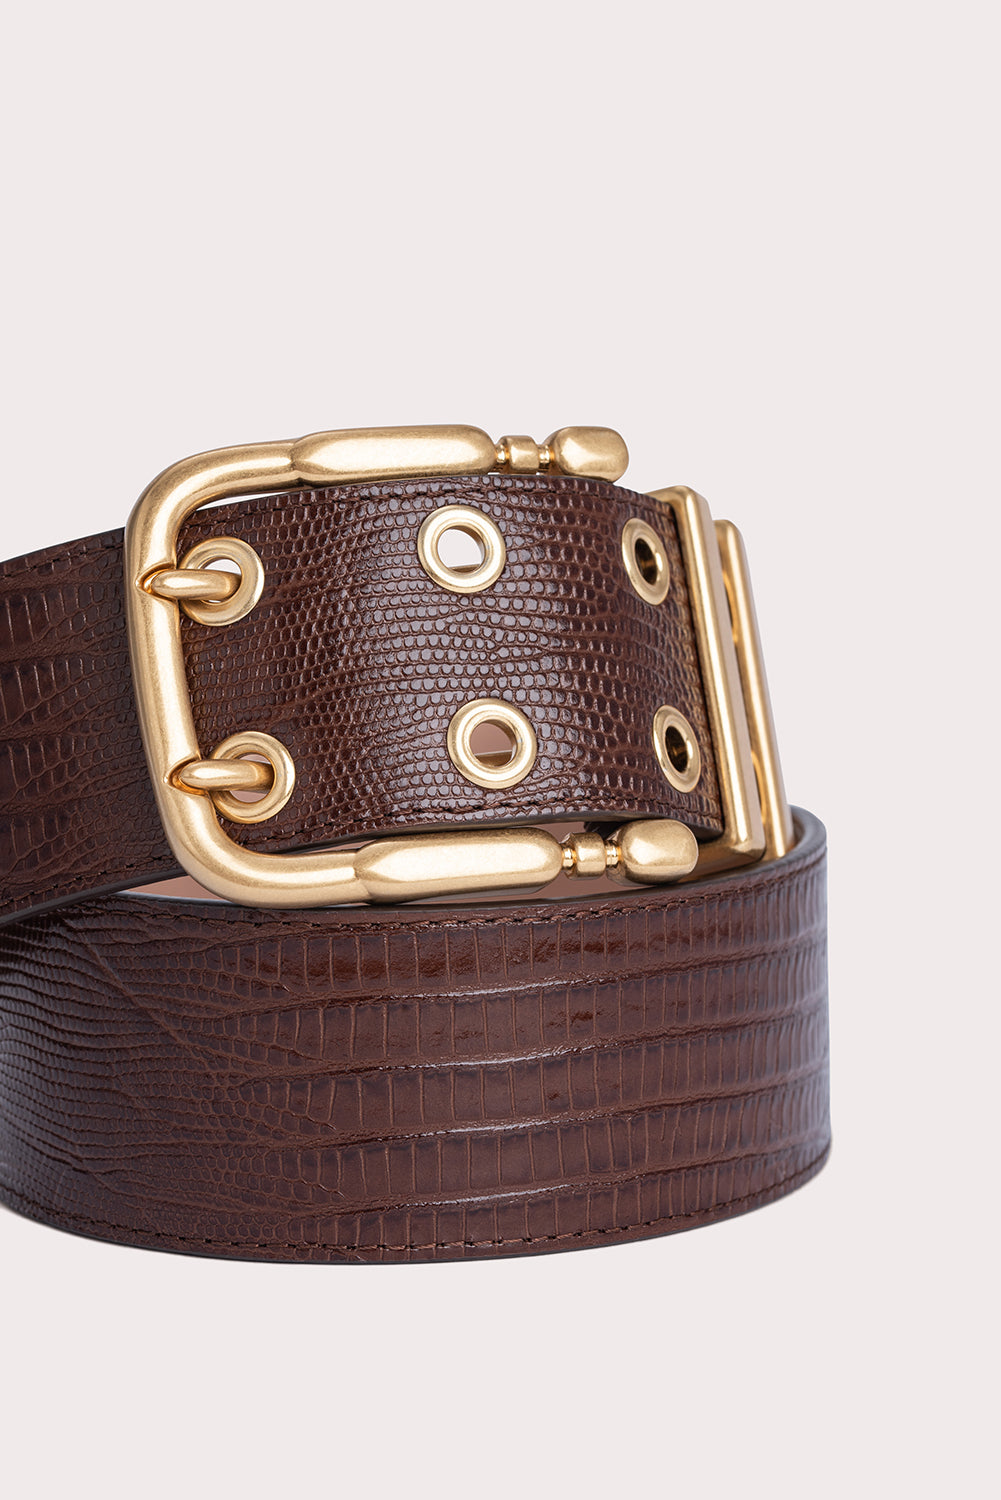 Duo Sequoia Lizard Embossed Leather